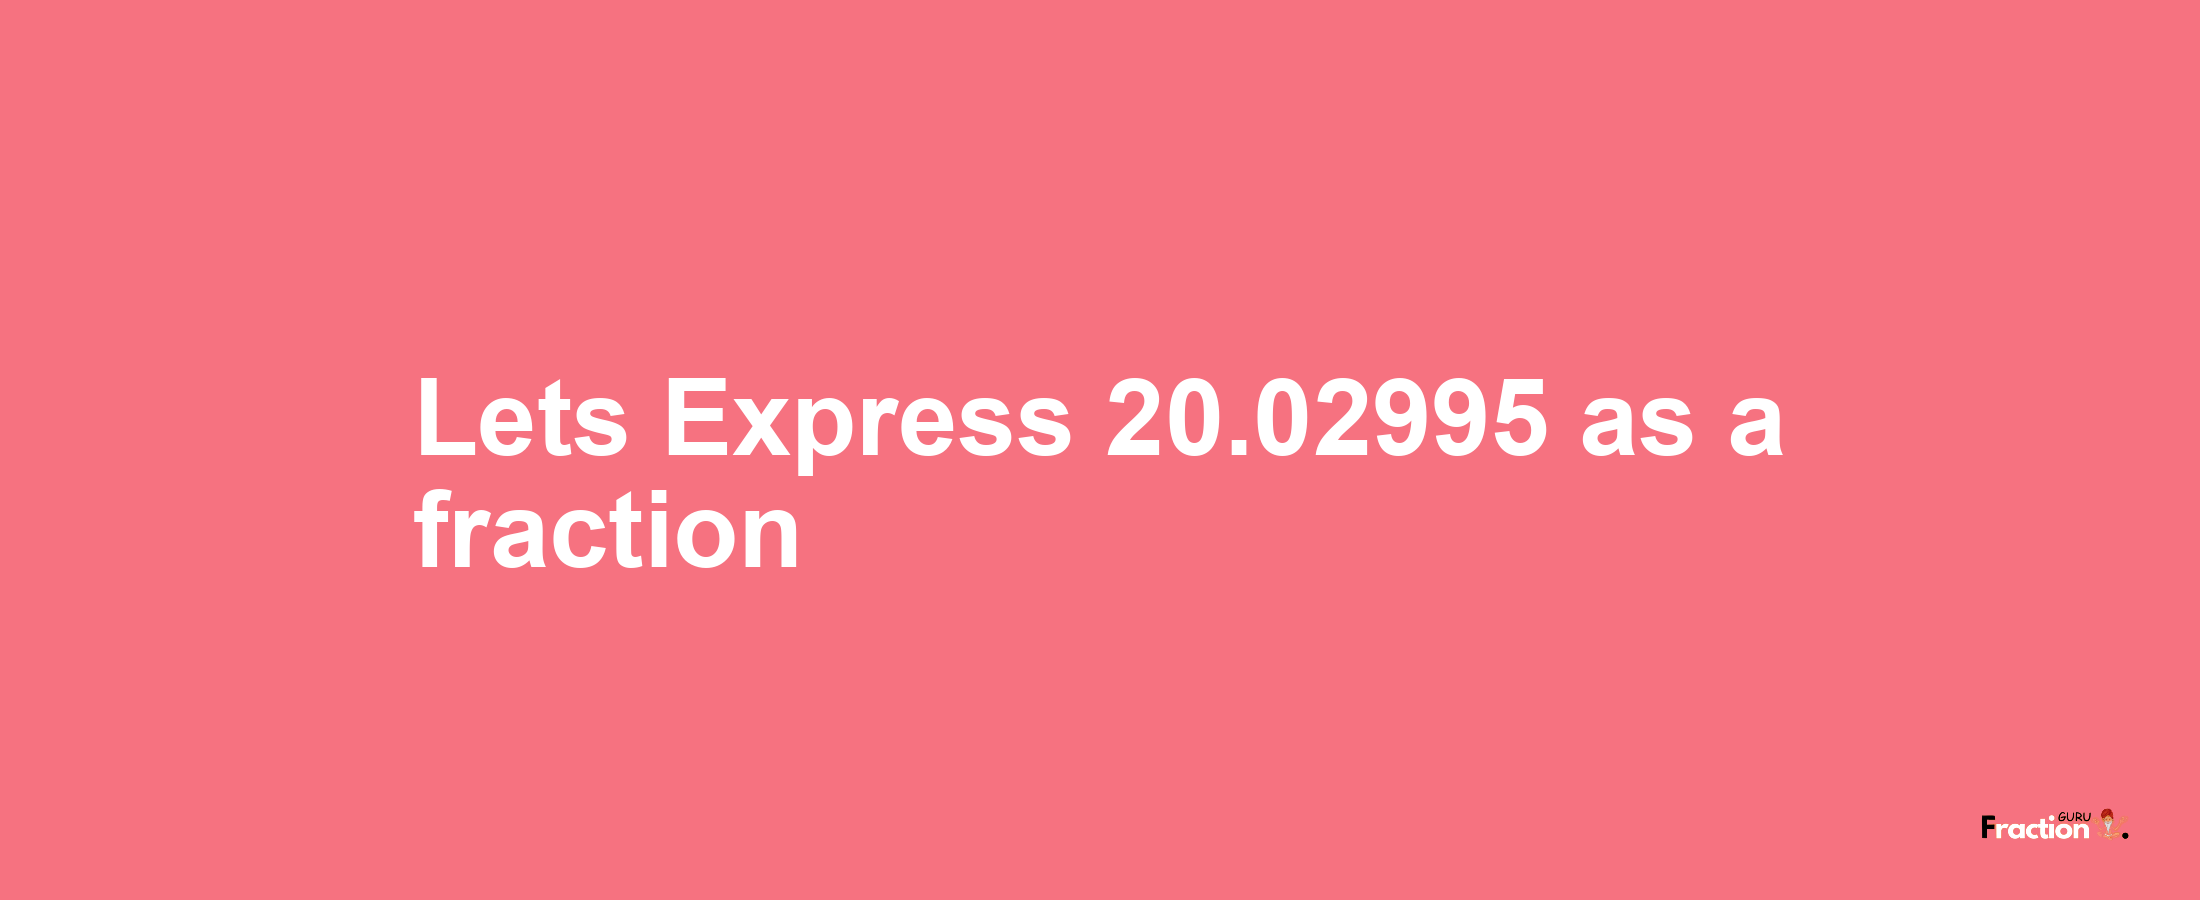 Lets Express 20.02995 as afraction